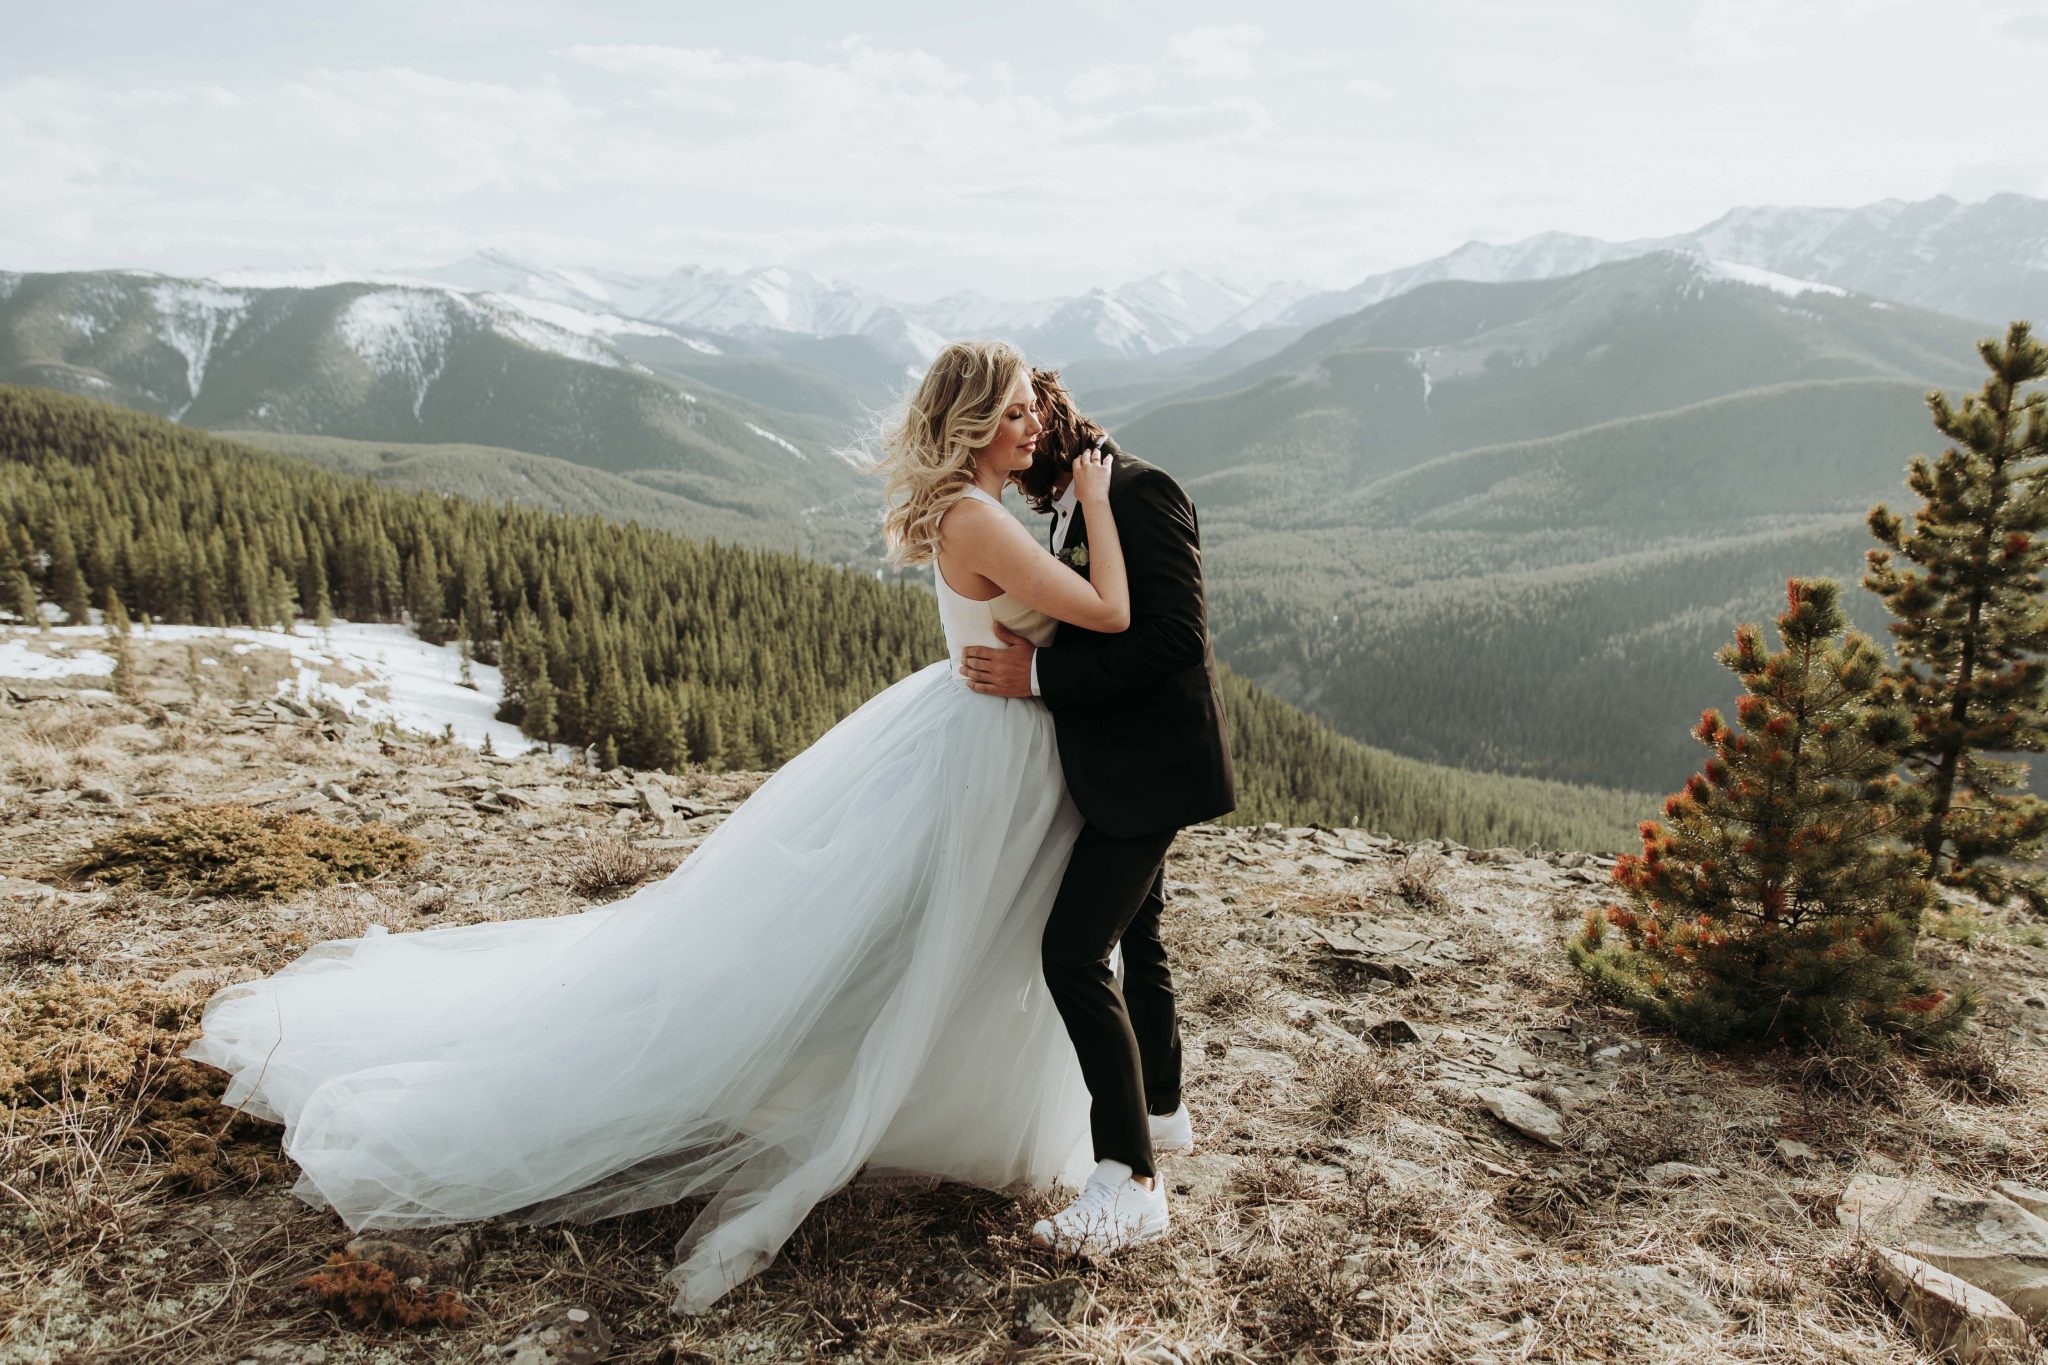 Romantic Bridal Gown for Mountainous Adventure Session featuring Contemporary Attire & Alberta Views Featured on Bronte Bridë